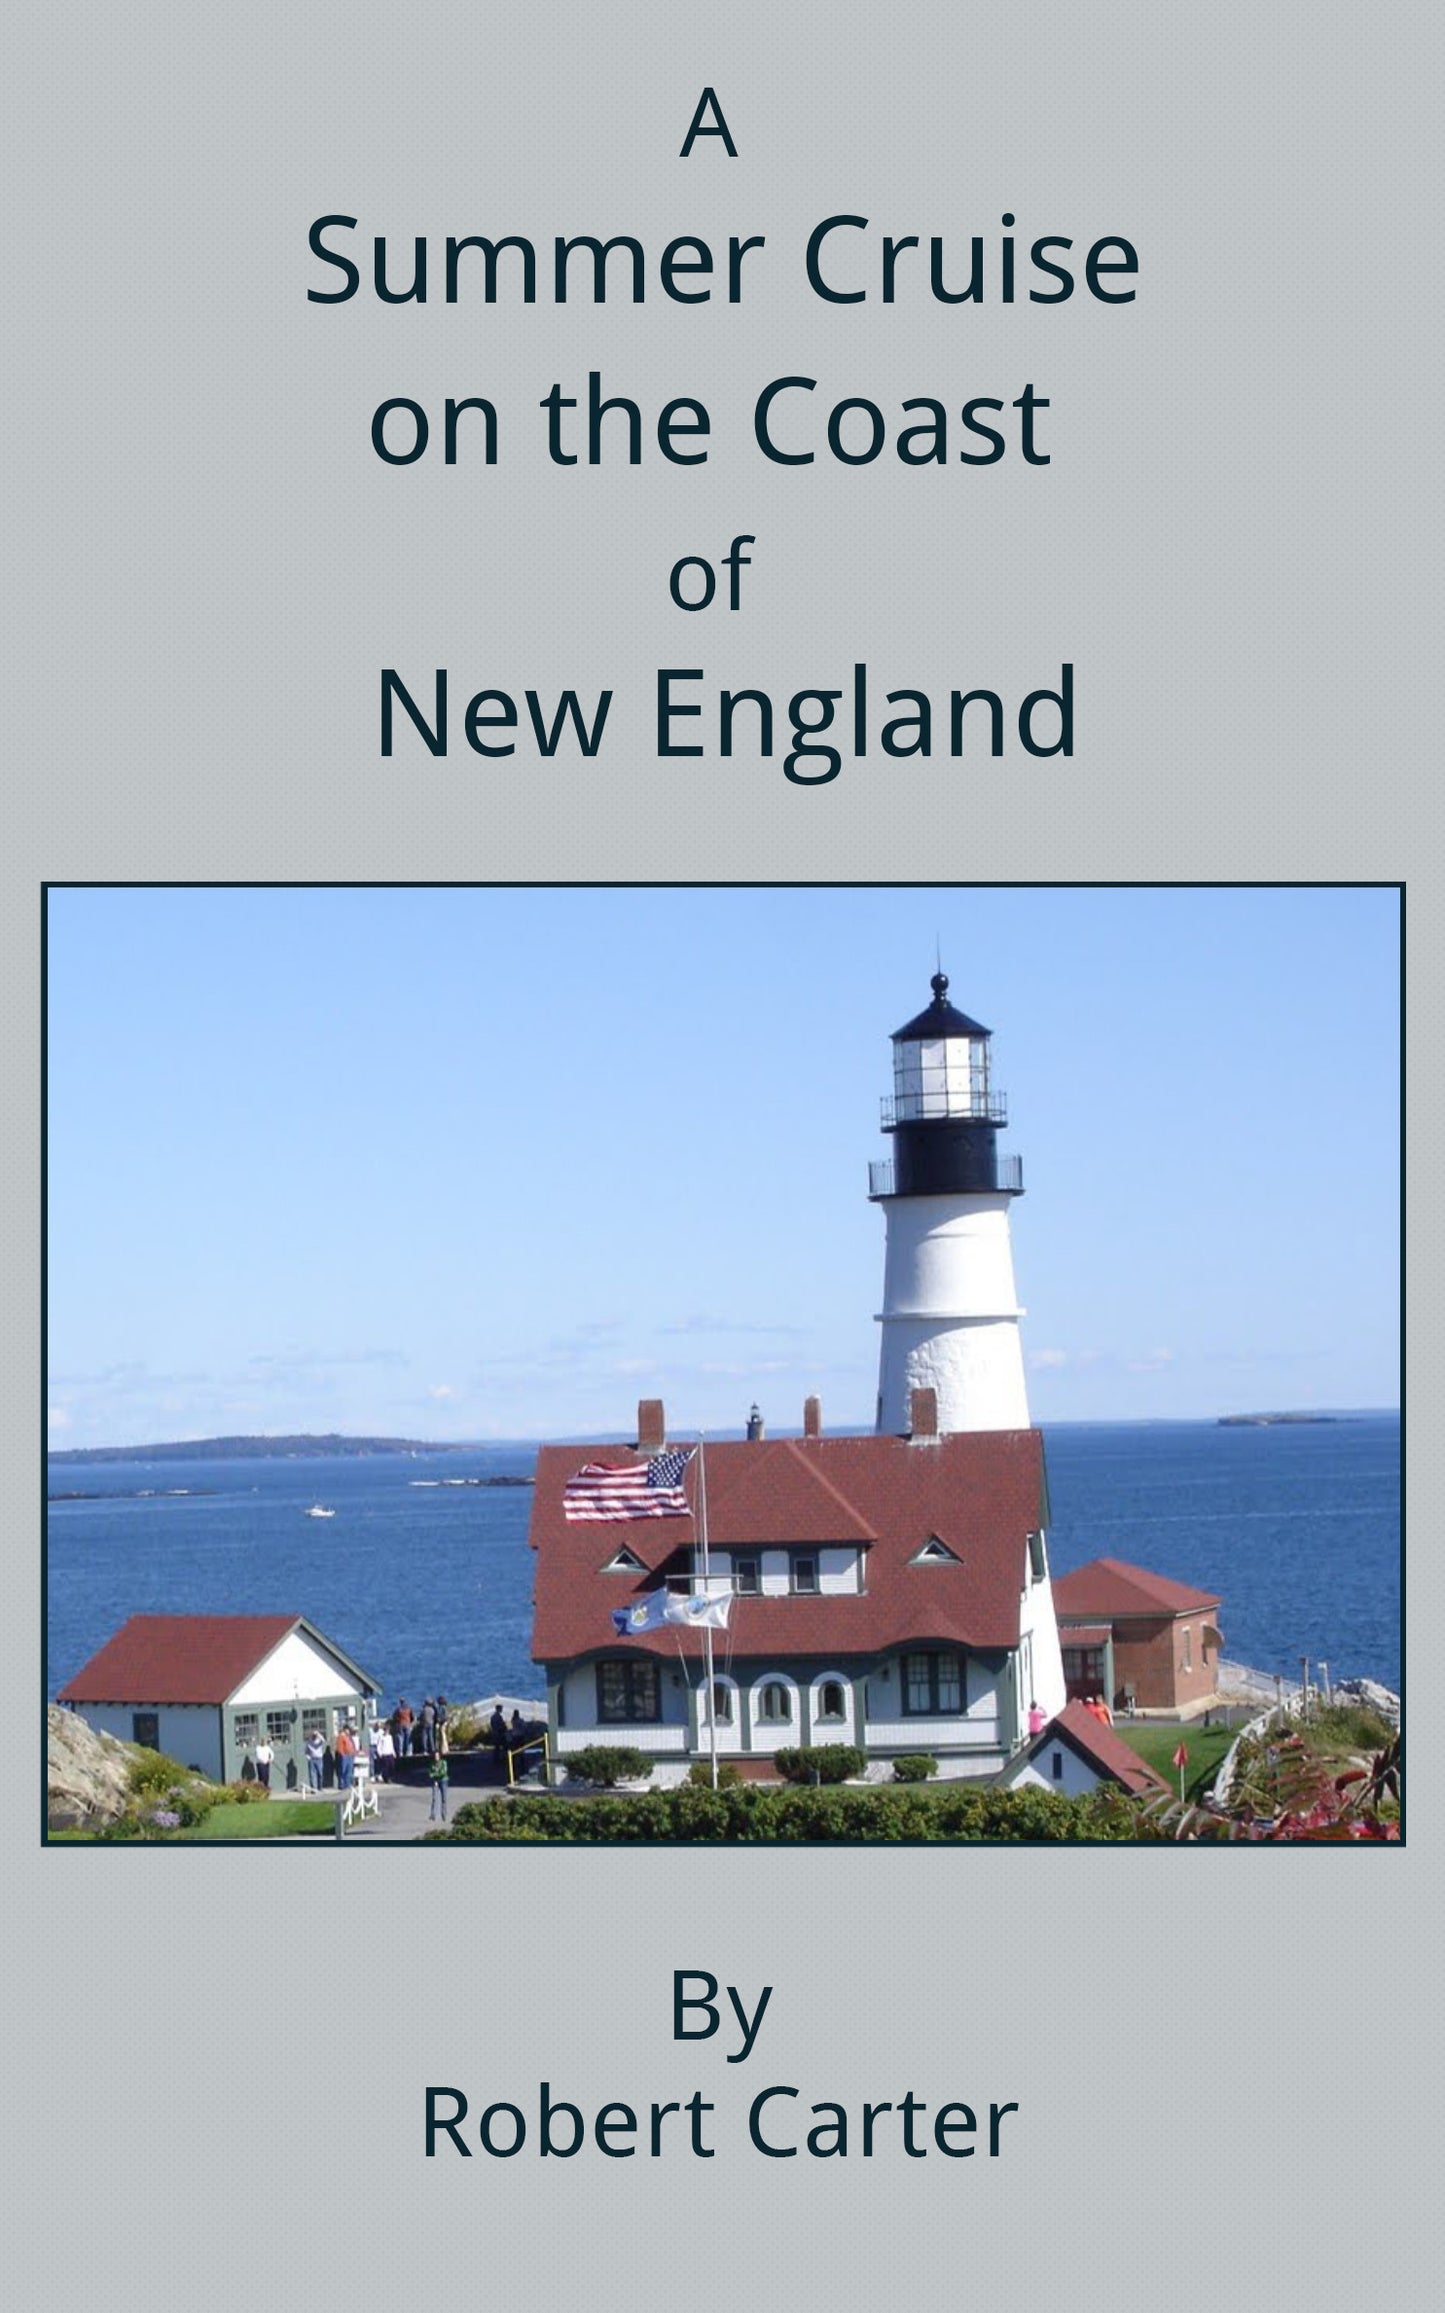 A Summer Cruise on the Coast of New England